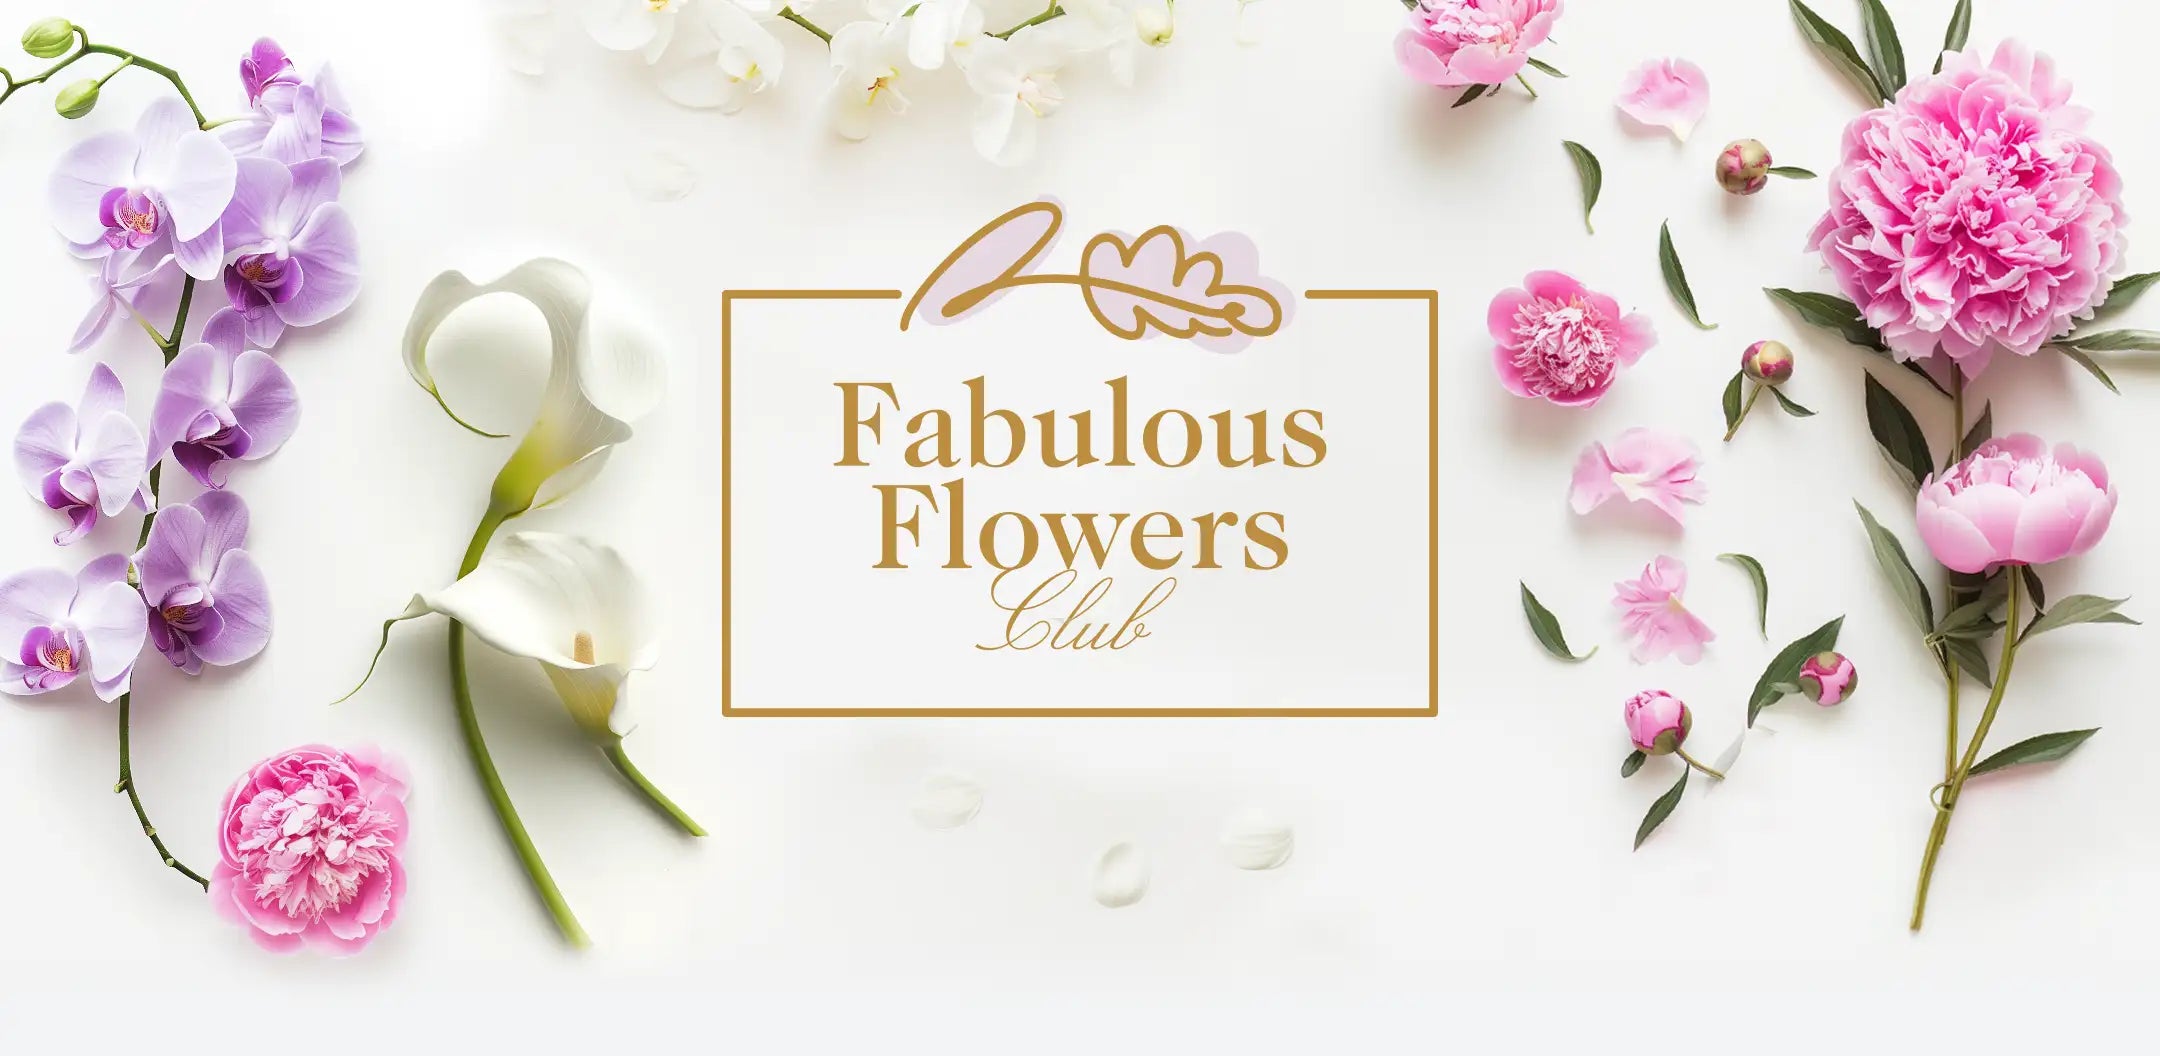 Elegant banner for the Fabulous Flowers Club featuring vibrant pink peonies, white calla lilies, and purple orchids on a white background. Fabulous Flowers and Gifts.